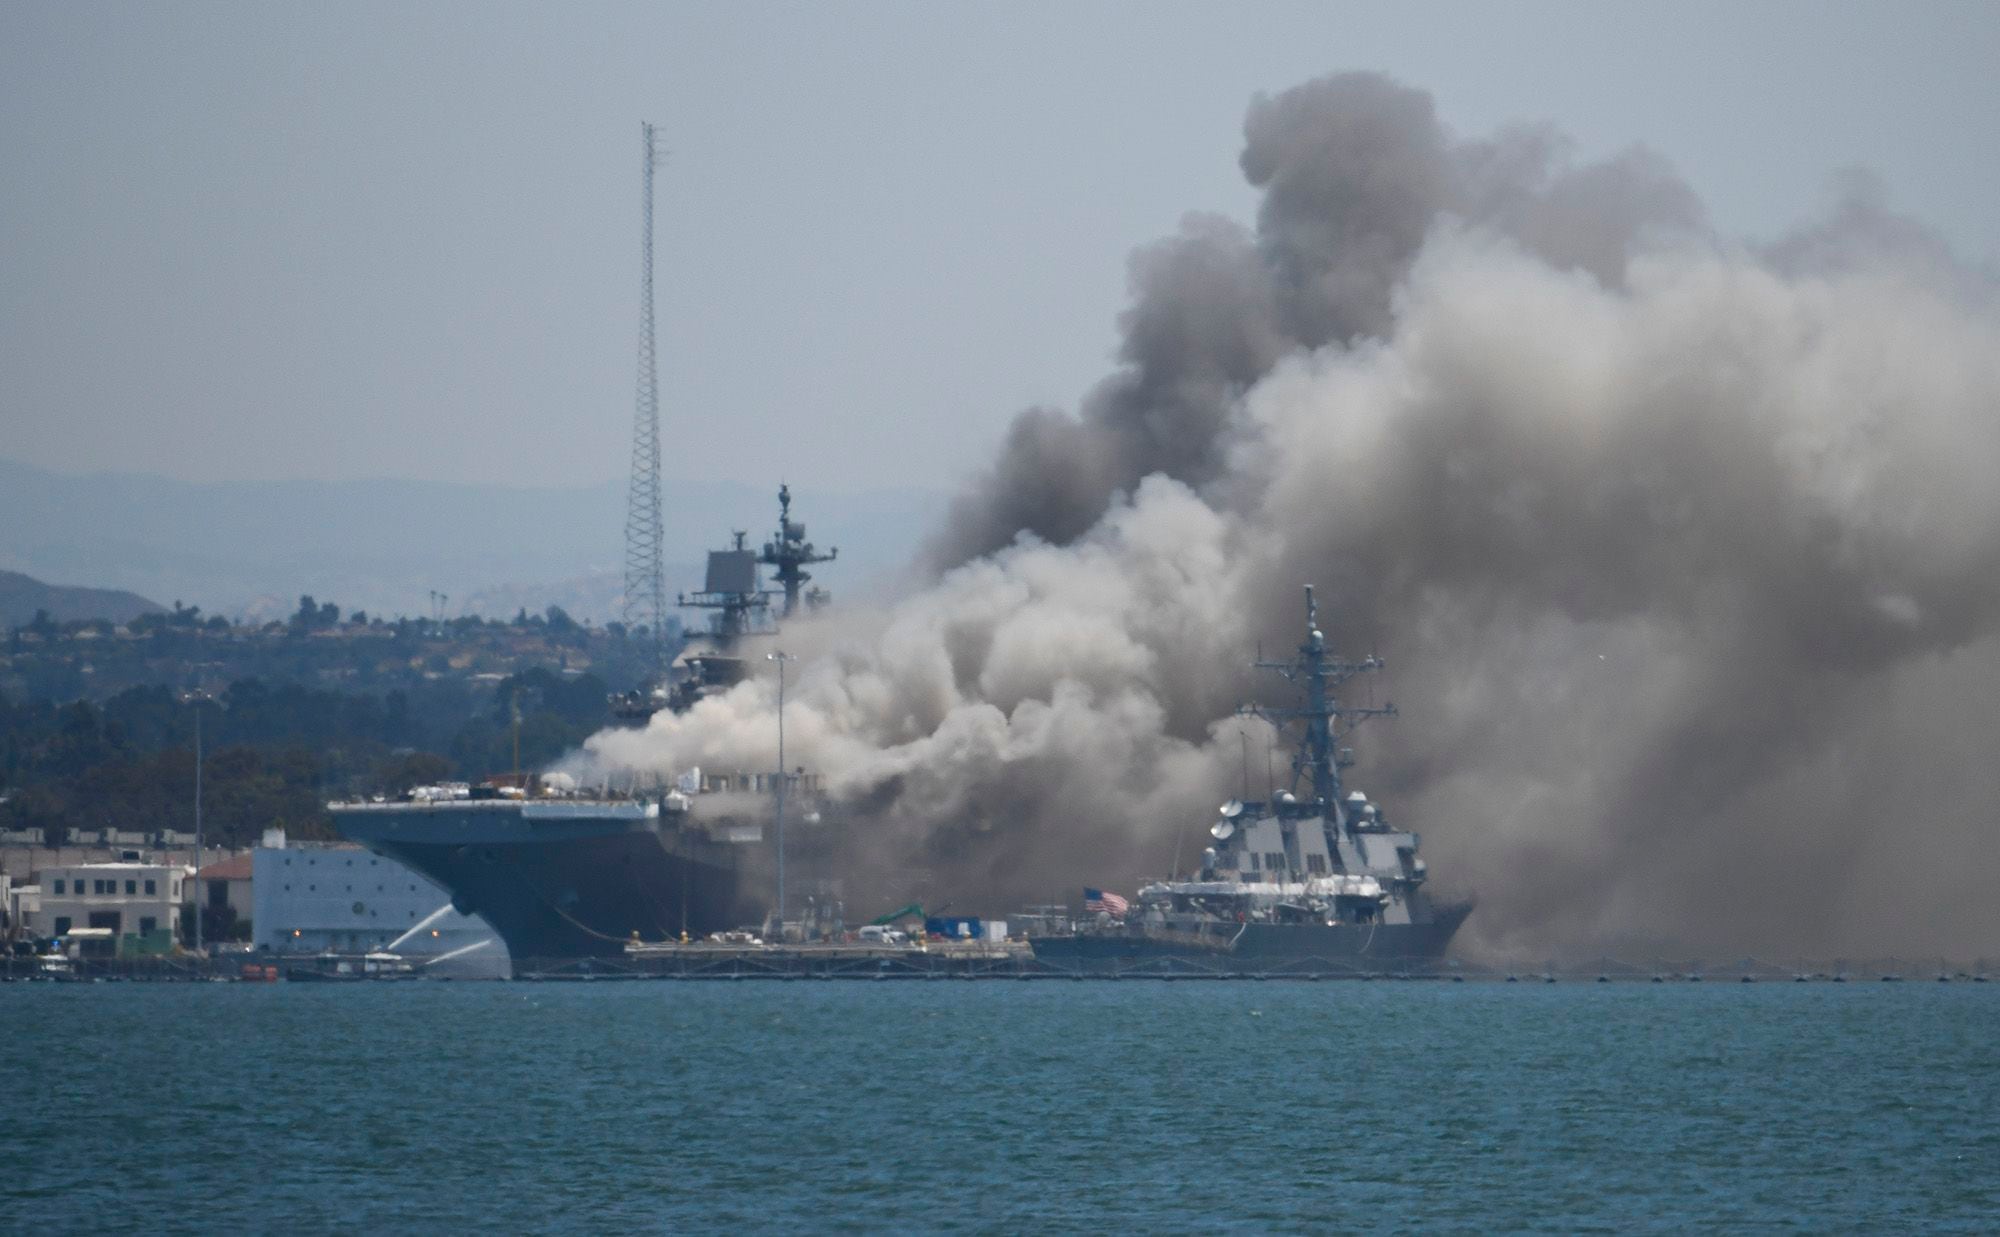 For the fire-ravaged ship Bonhomme Richard, the US Navy has no